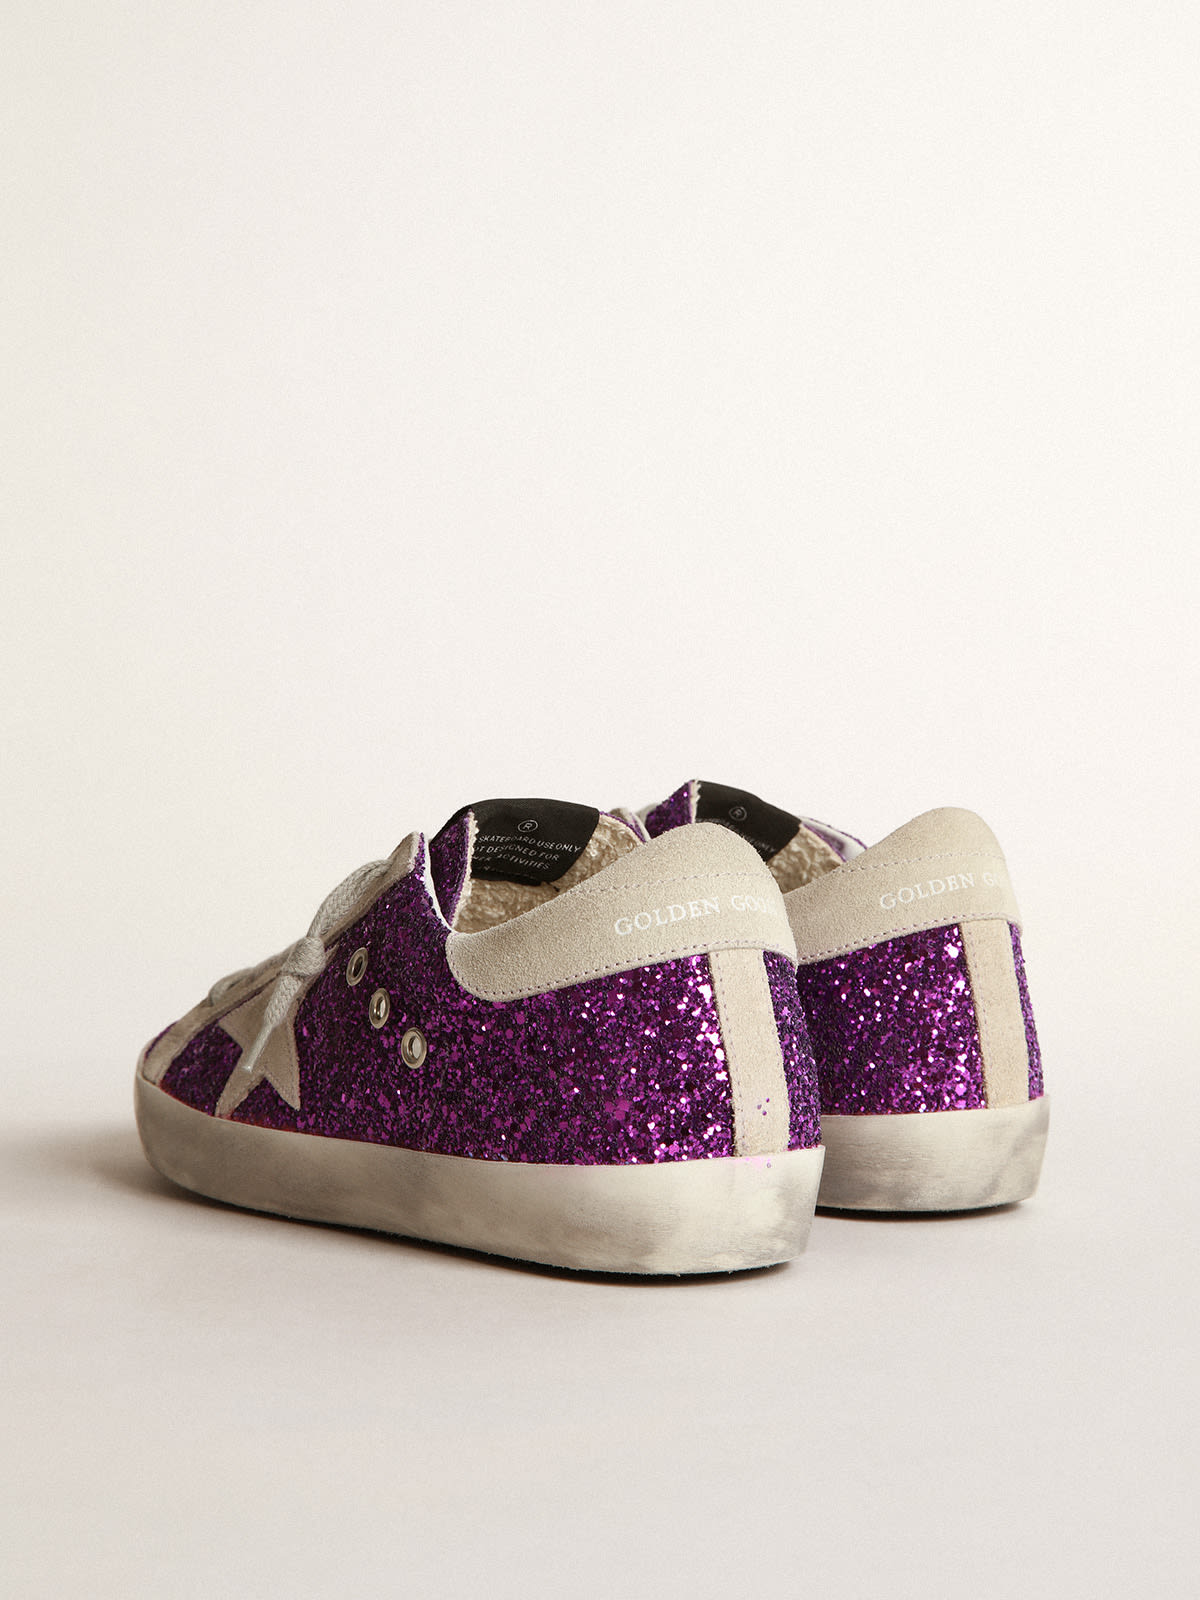 Golden Goose - Super-Star sneakers with purple glitter and lettering on the foxing in 